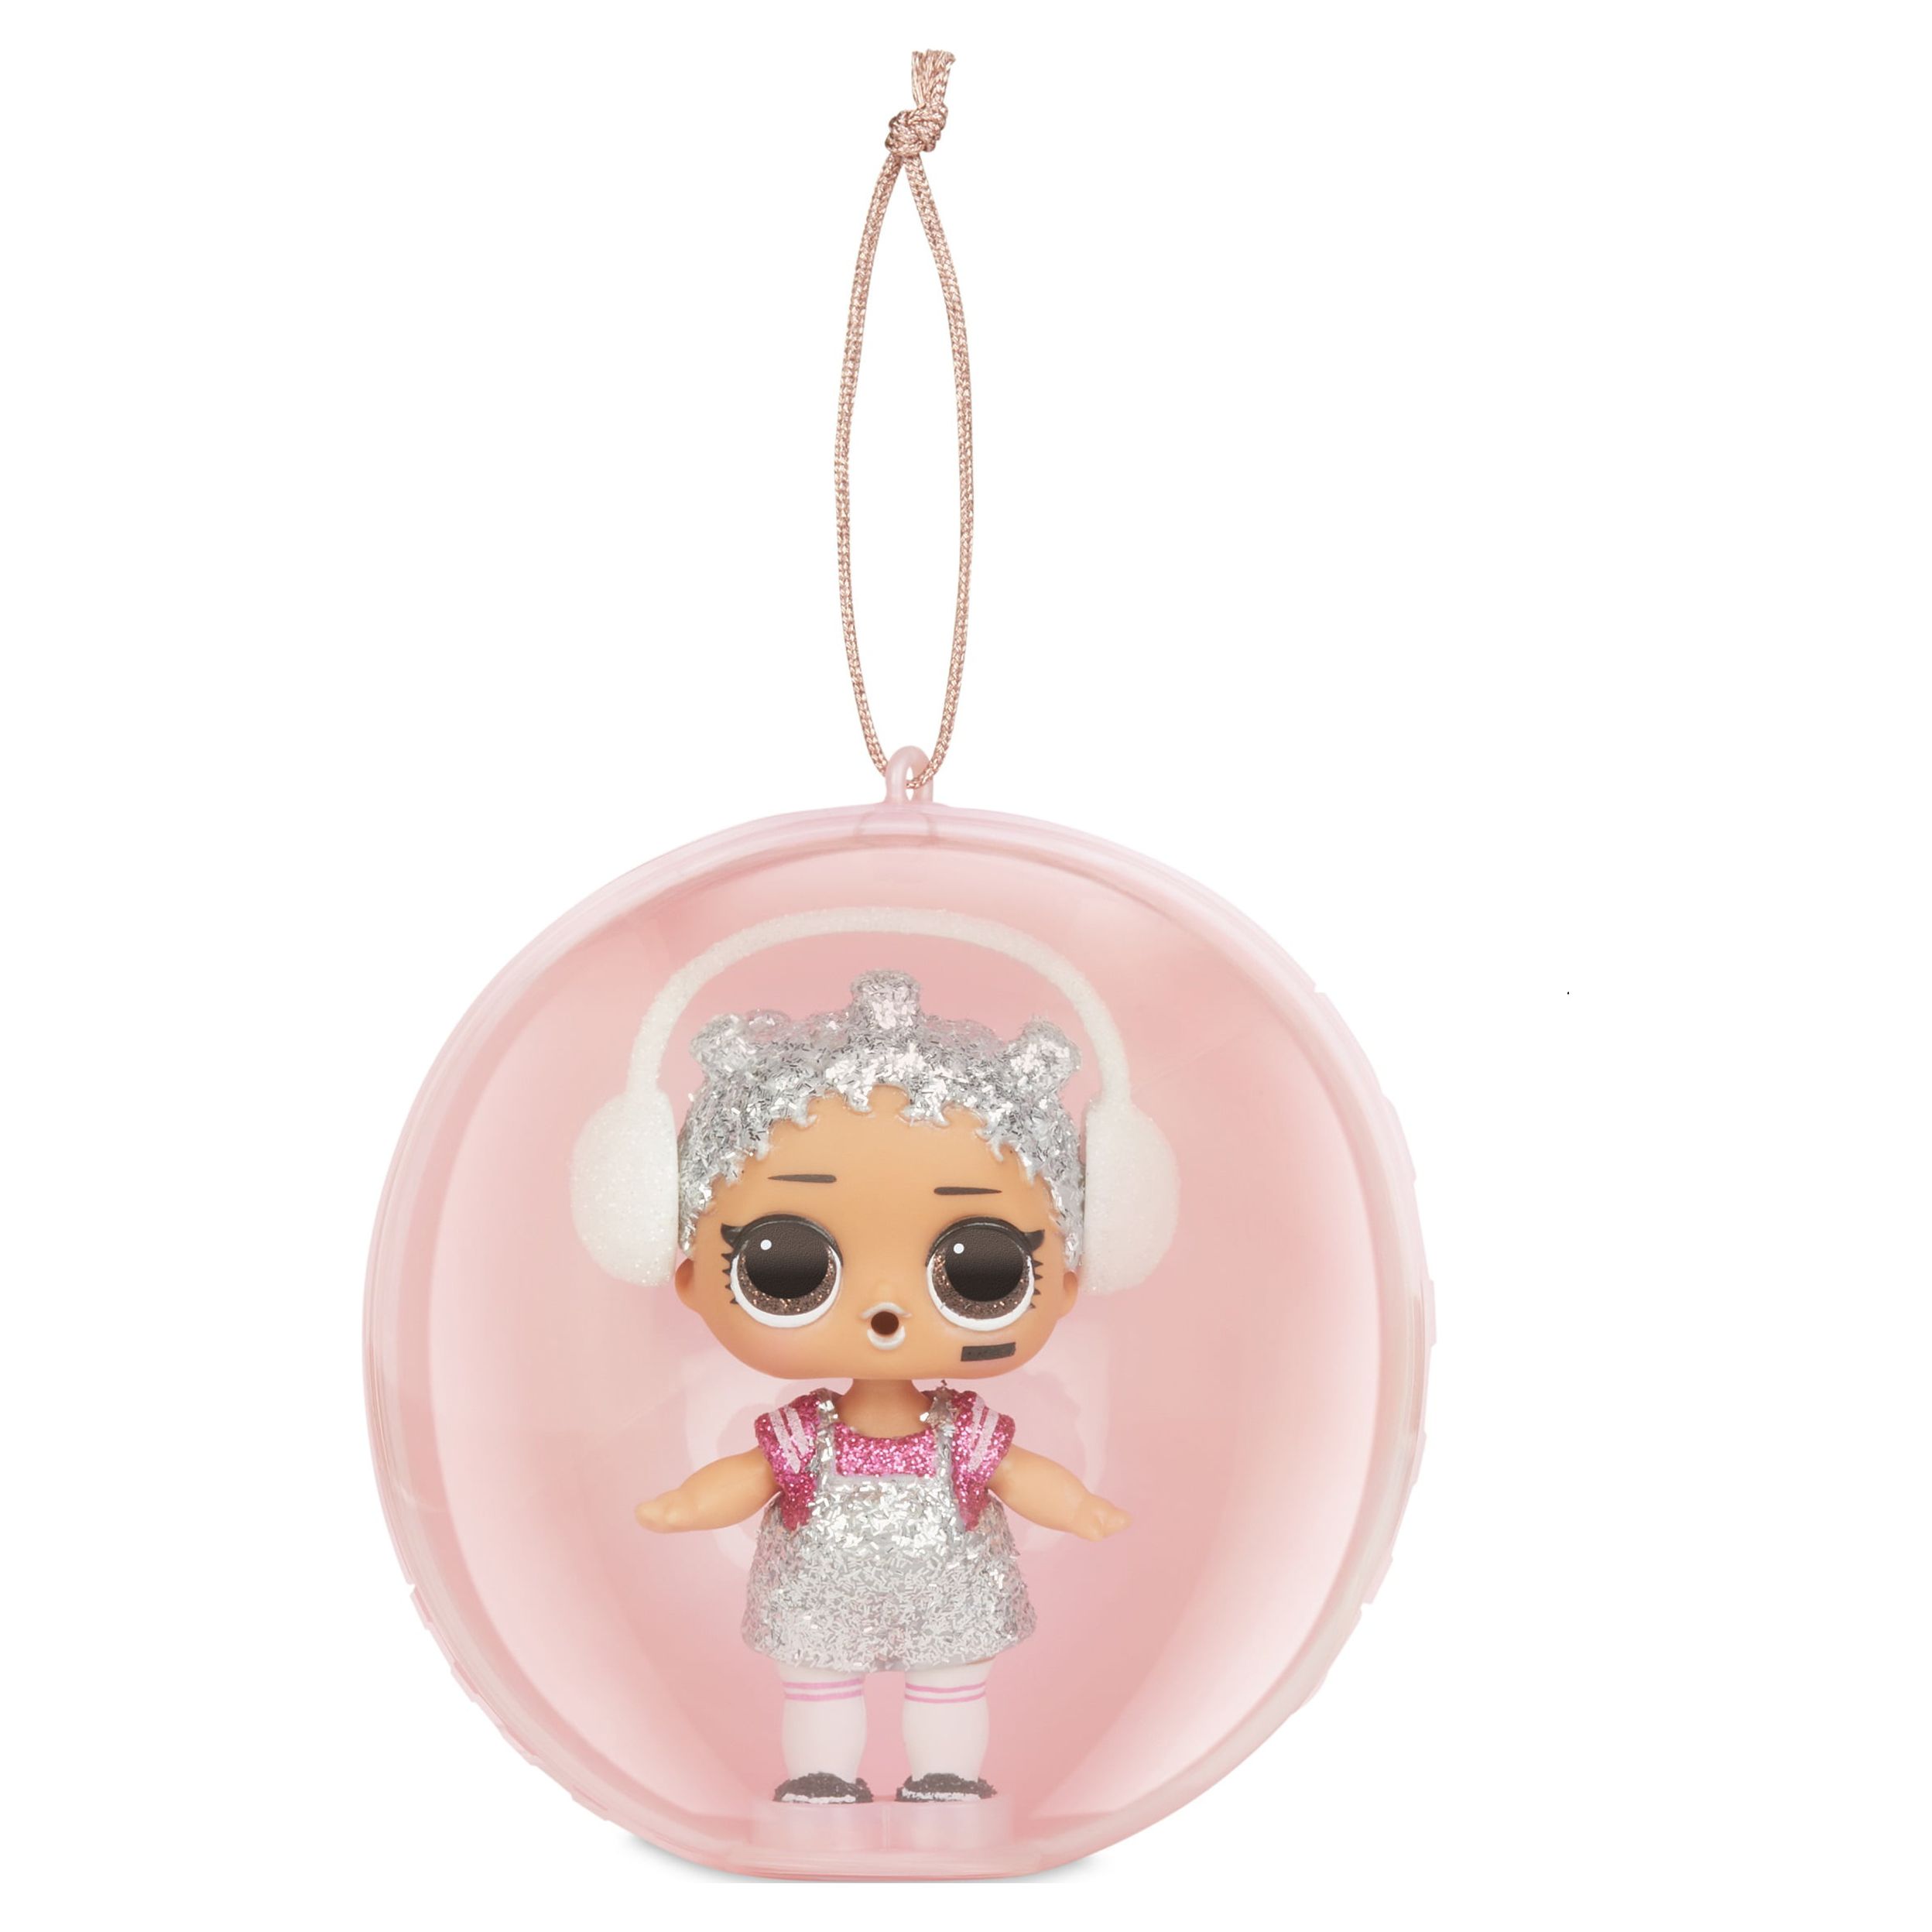 LOL Surprise Bling Series With Glitter Details & Doll Display, Great Gift for Kids Ages 4 5 6+ - image 2 of 5